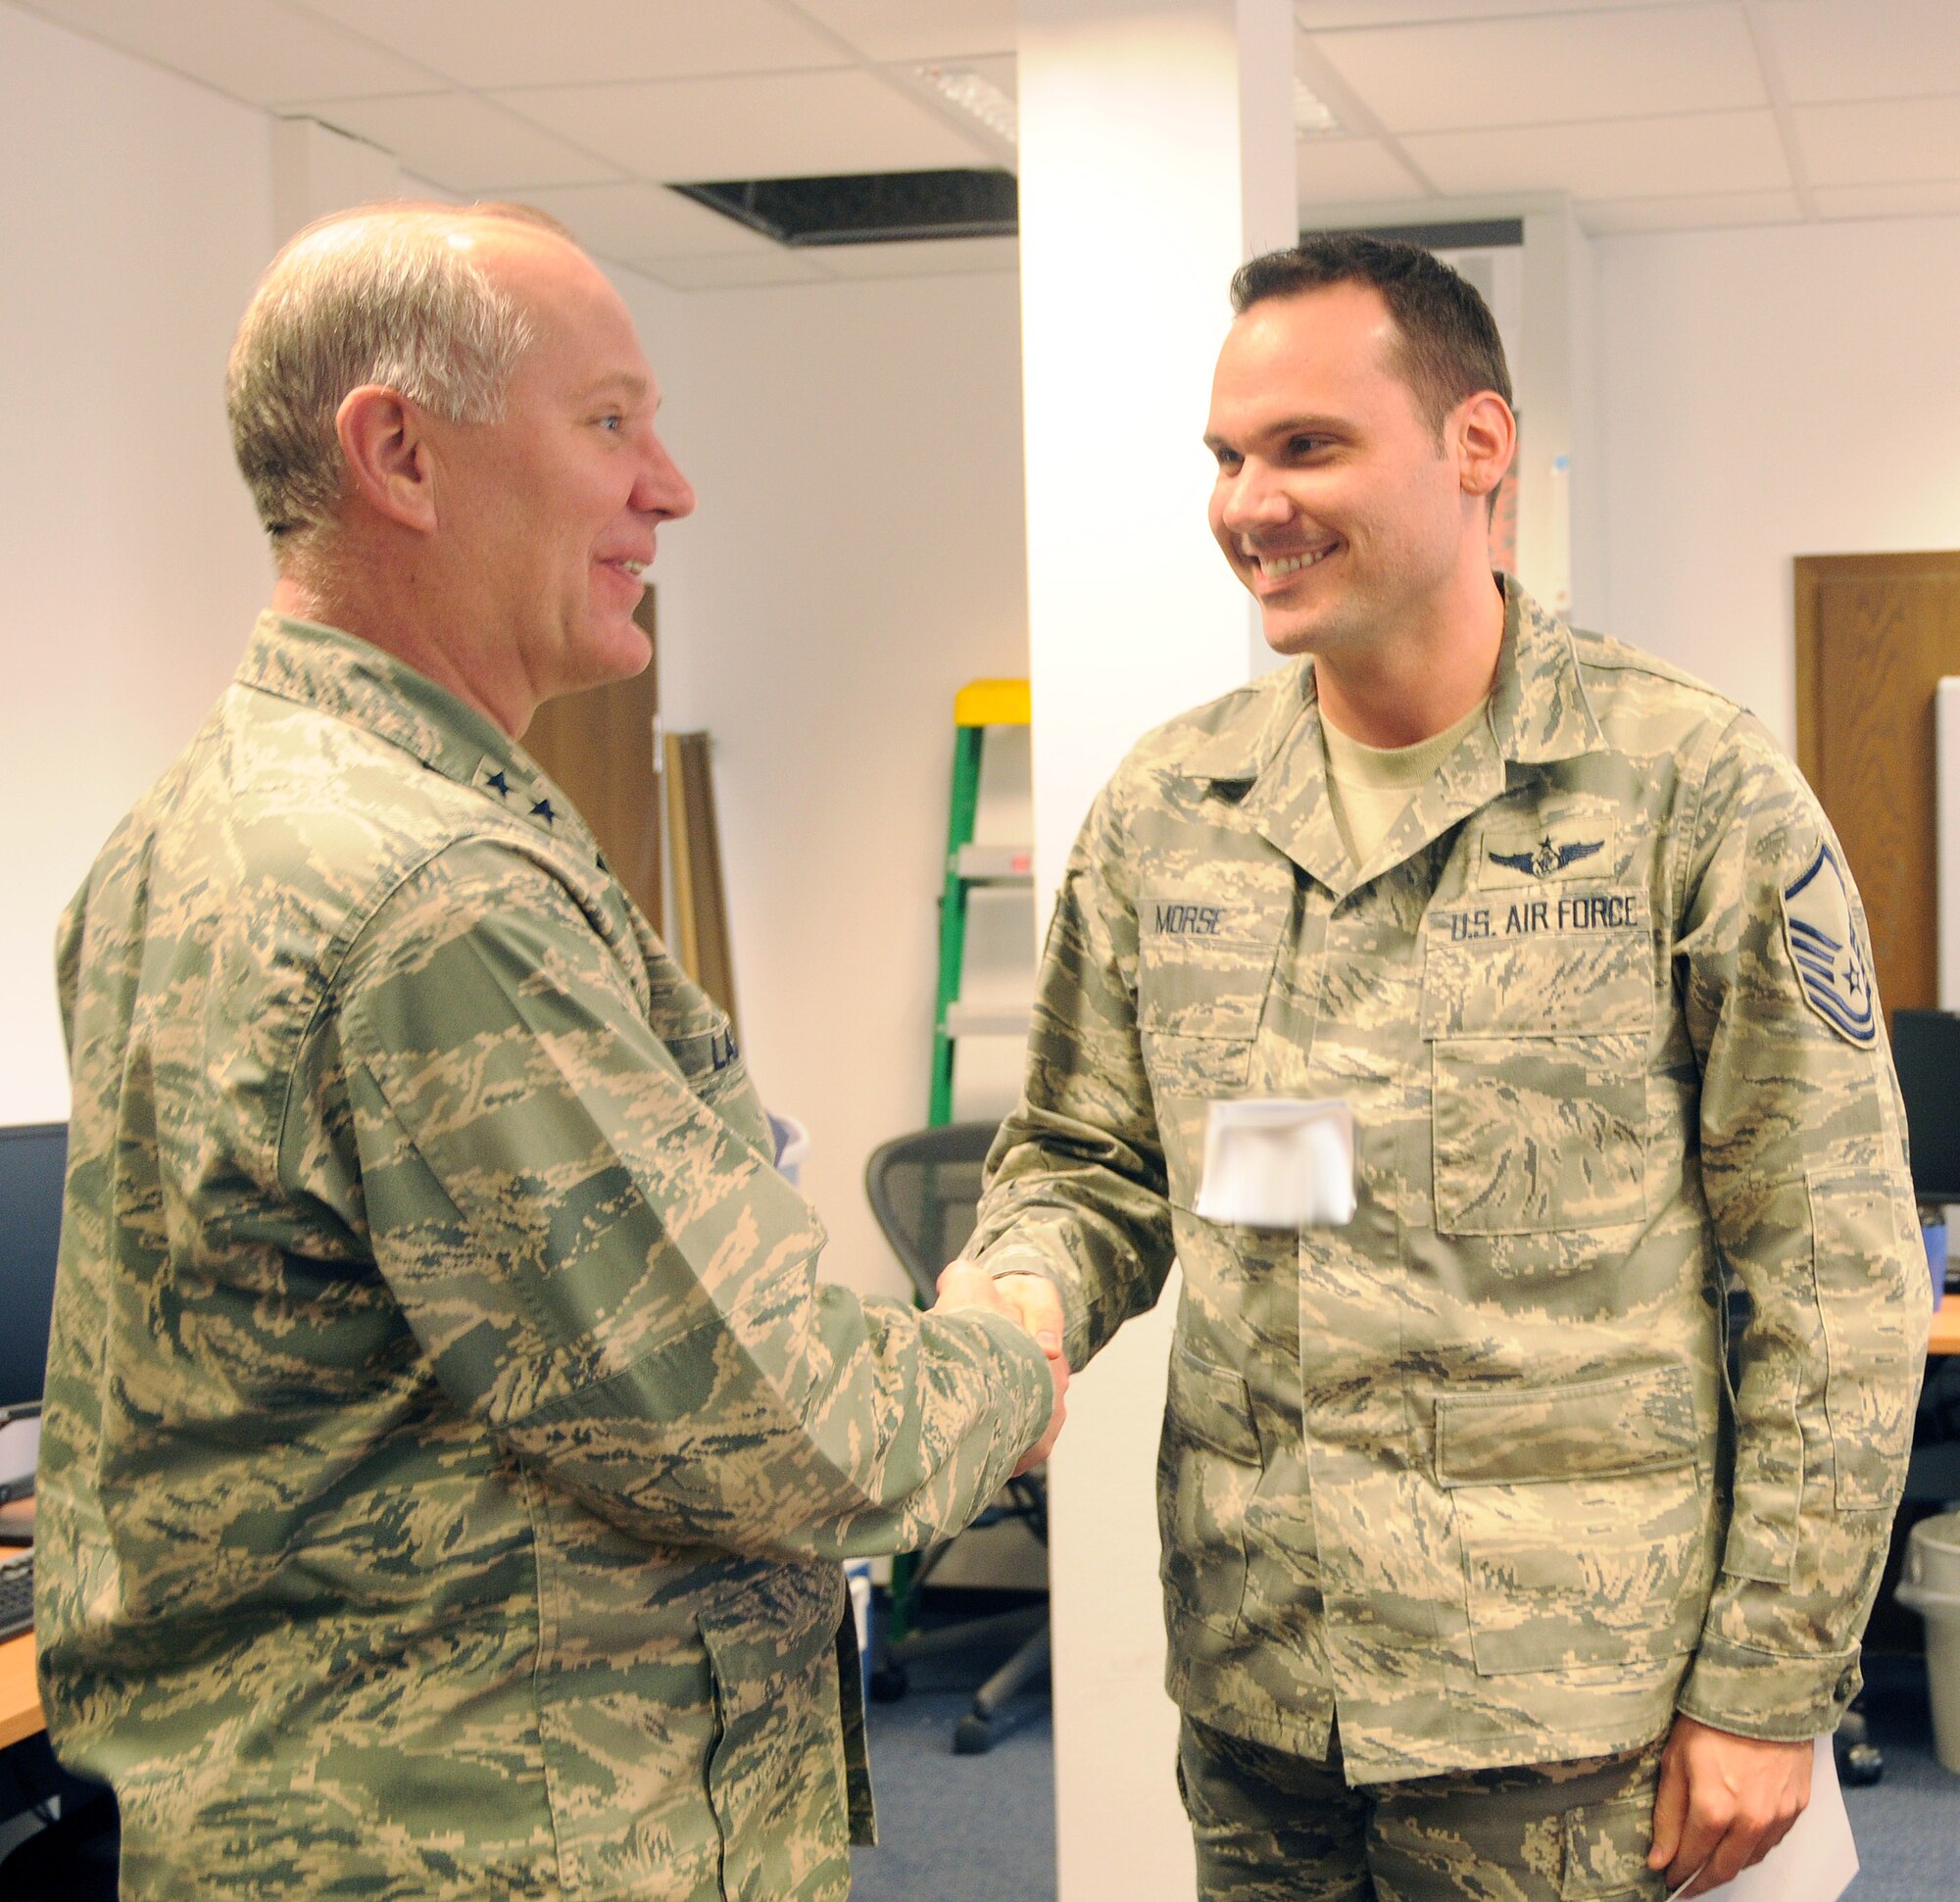 RAMSTEIN AIR BASE, Germany – Maj. Gen. Ronald Ladnier, 17th Air Force commander, congratulates Senior Master Sgt. (select) David Morse on his selection for promotion March 4. Sergeant Morse is the 617th Air and Space Operations Center NCO in charge of the Air Mobility Division. Six master sergeants from 17th AF were selected for promotion to senior master sergeant. (U.S. Air Force photo by Staff Sgt. Stefanie Torres)